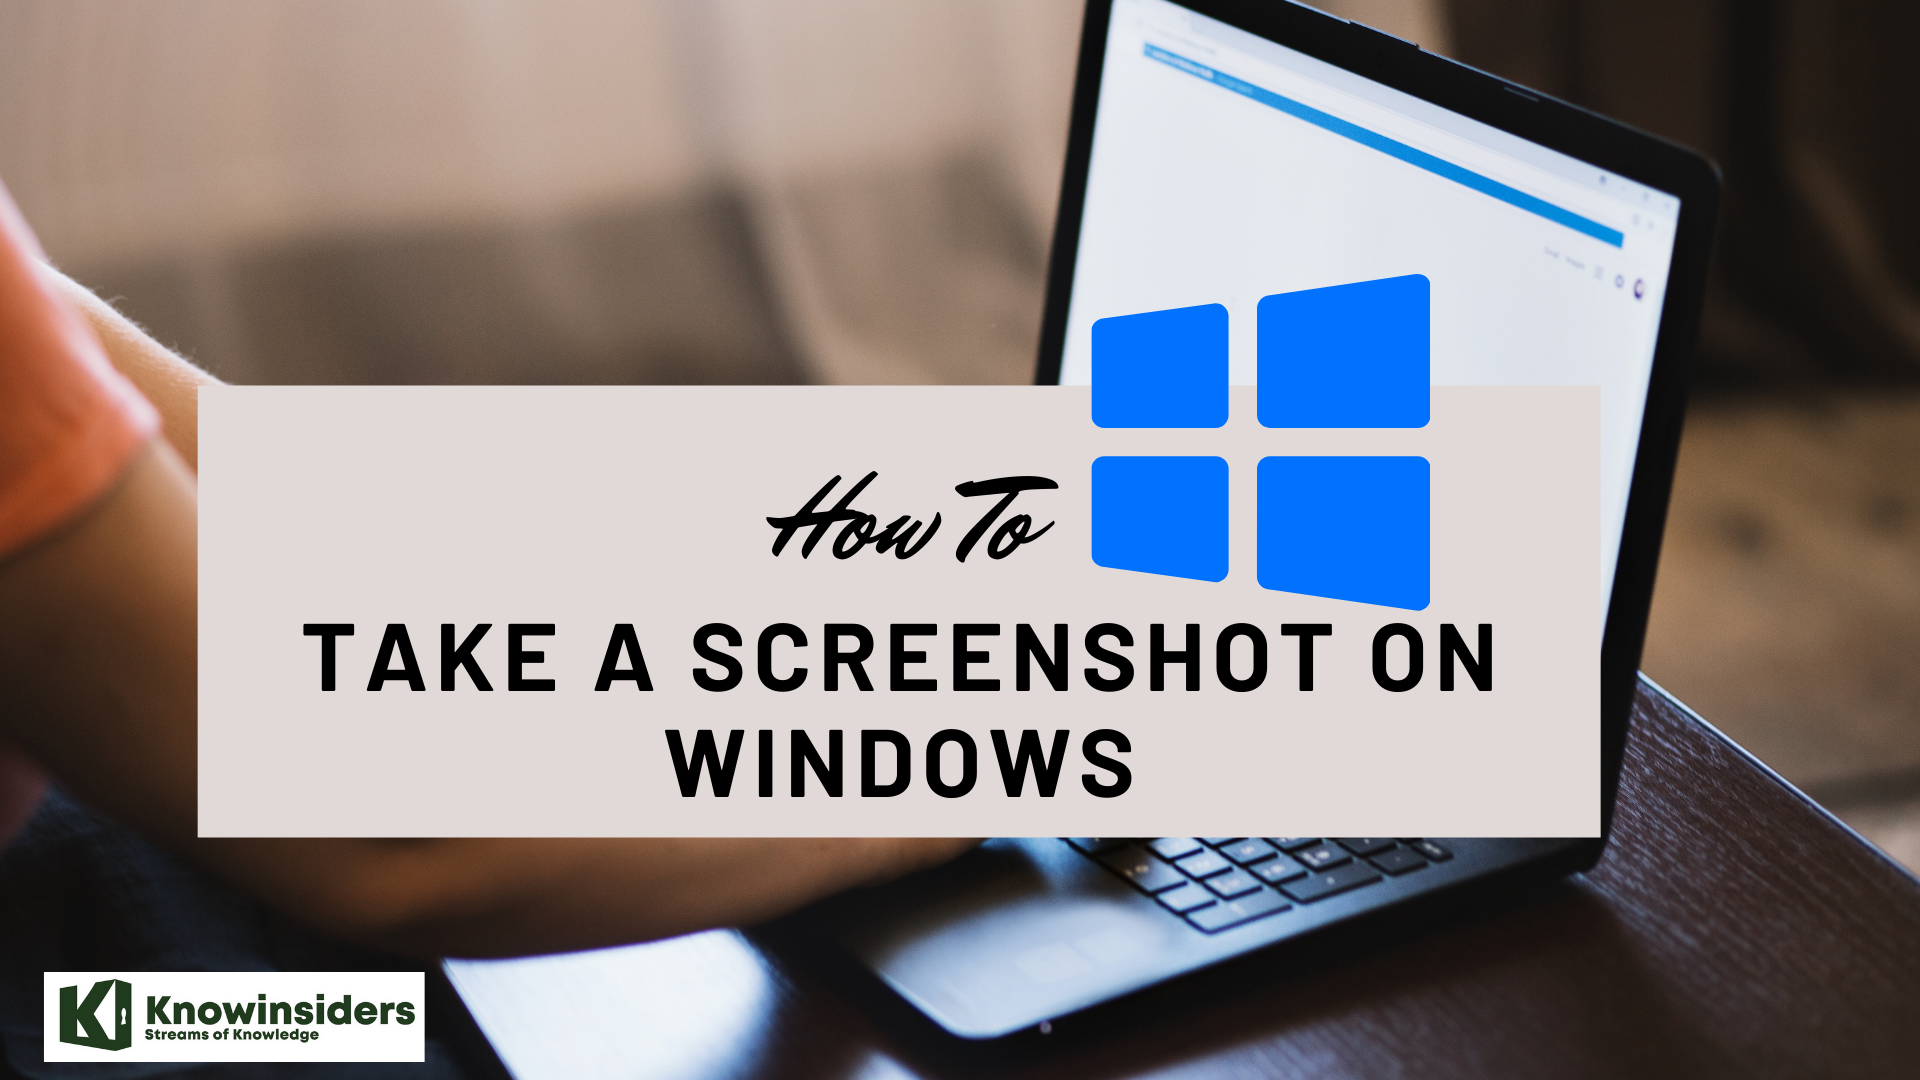 How to take a screenshot on Windows or laptop